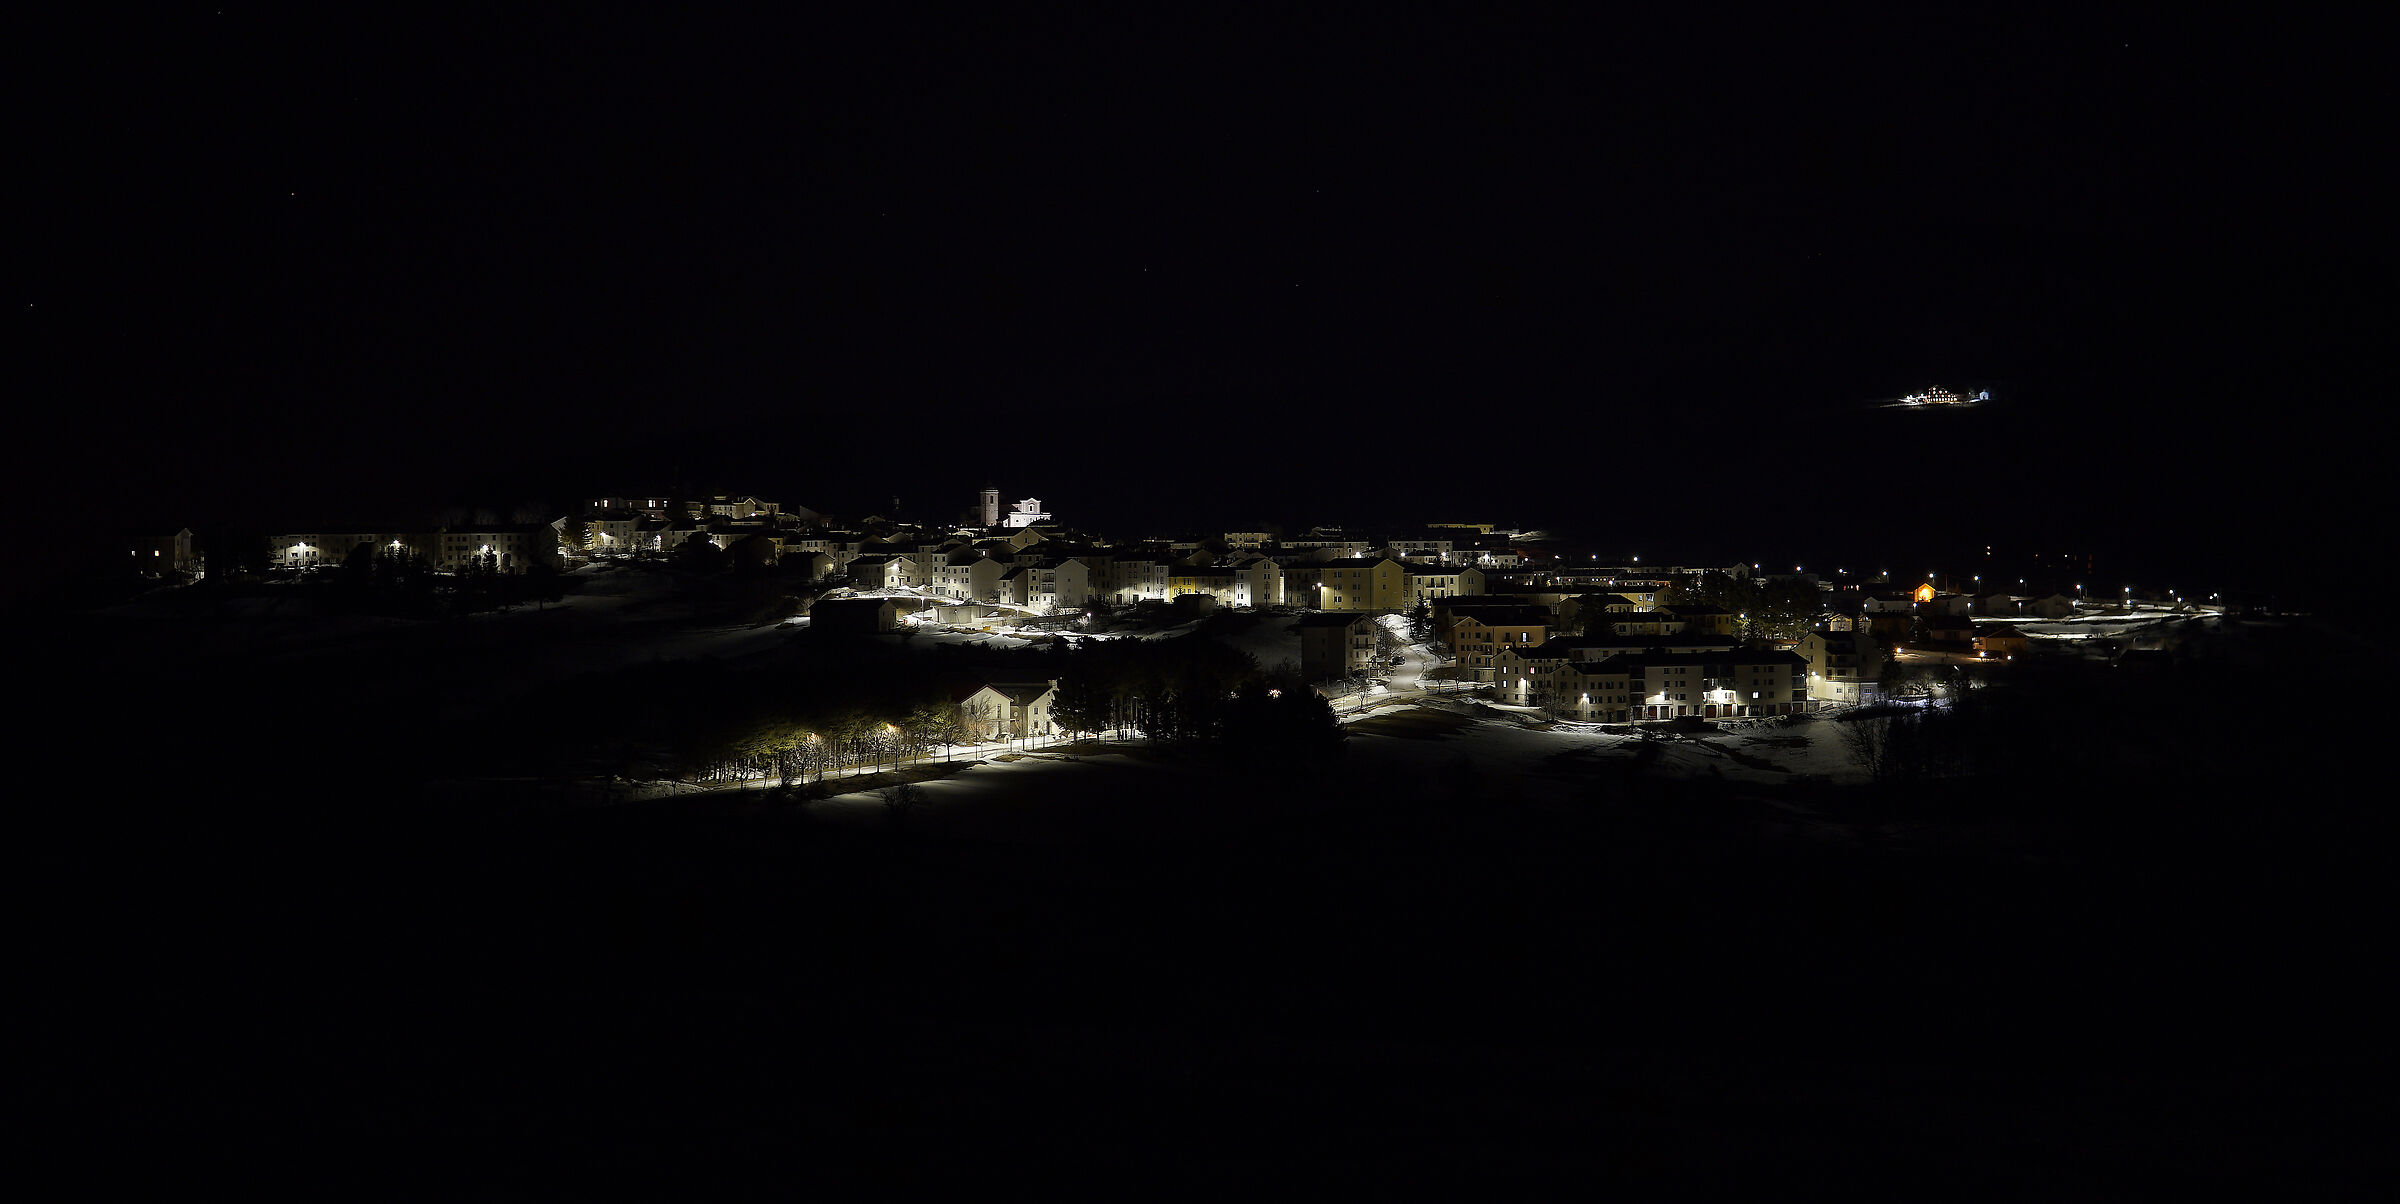 Capracotta in winter 1 (late at night)...